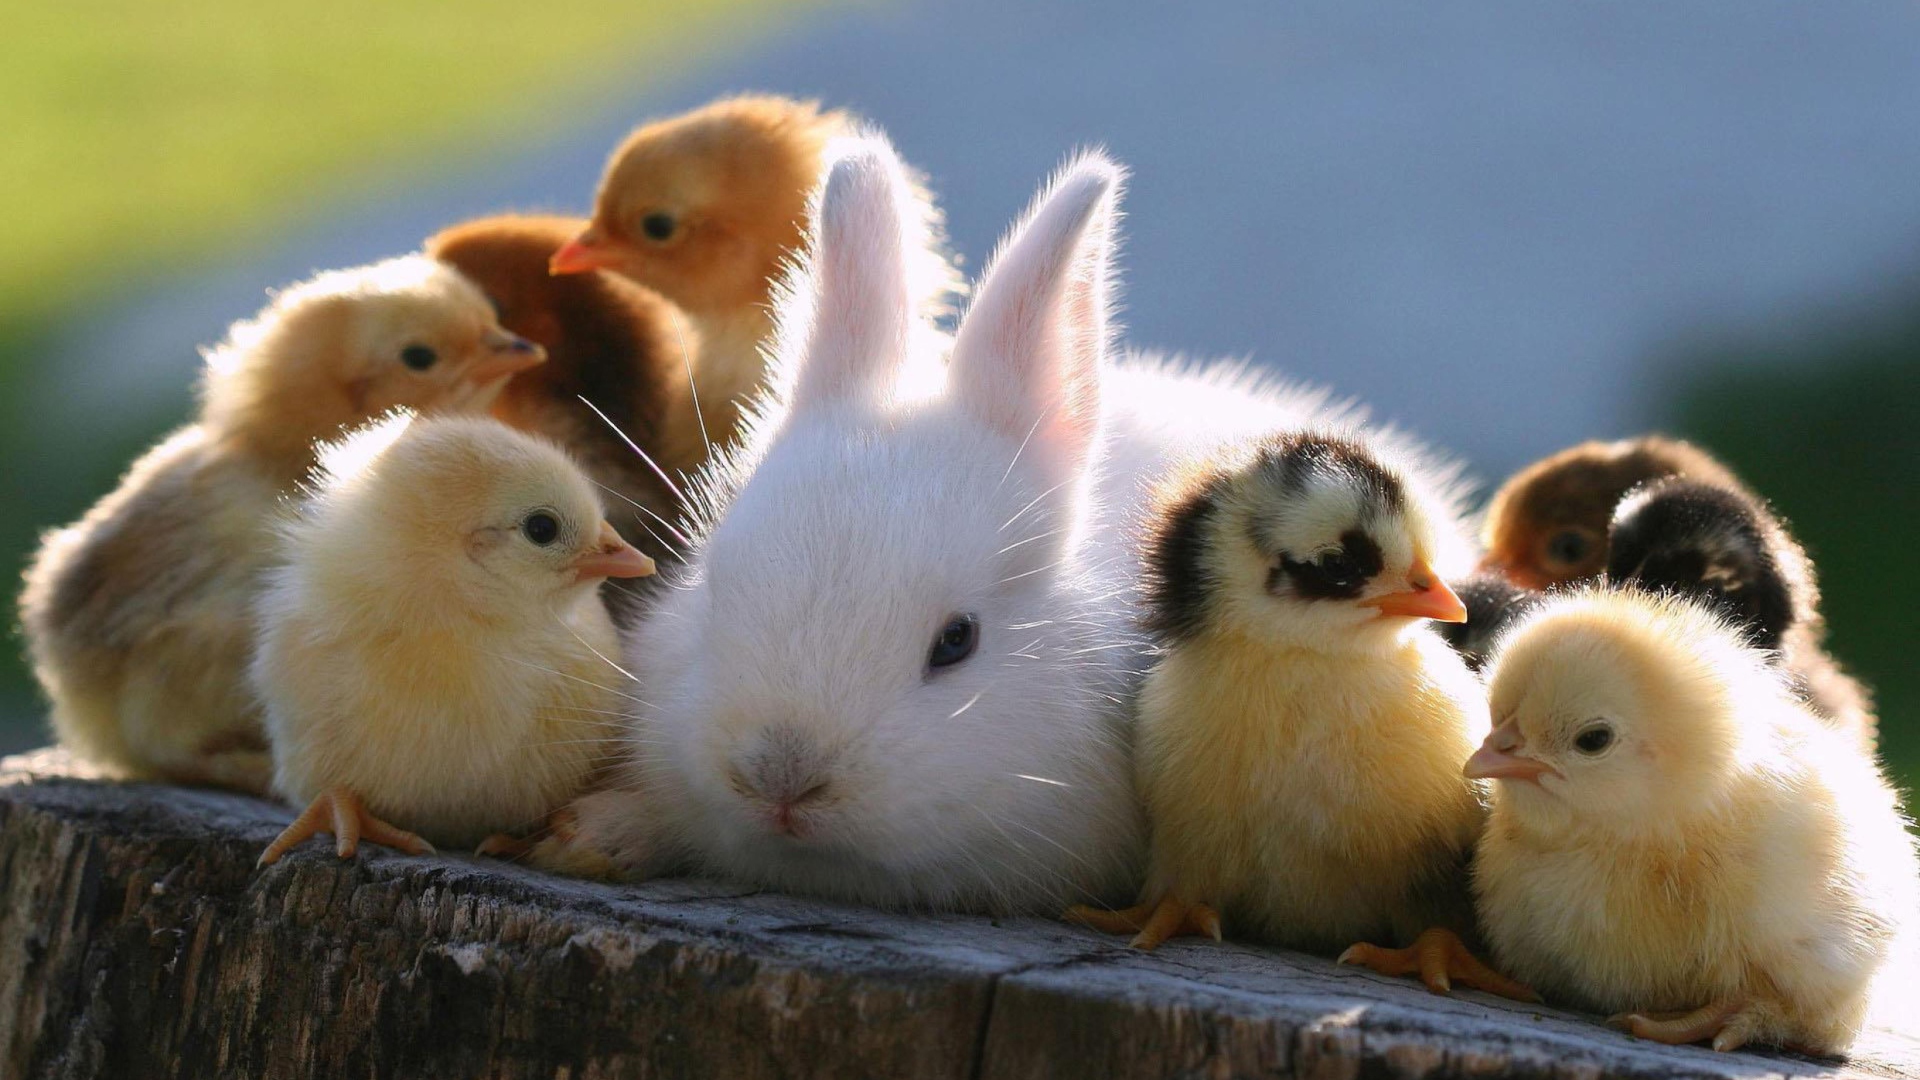 Easter Bunny And Ducklings wallpaper 1920x1080